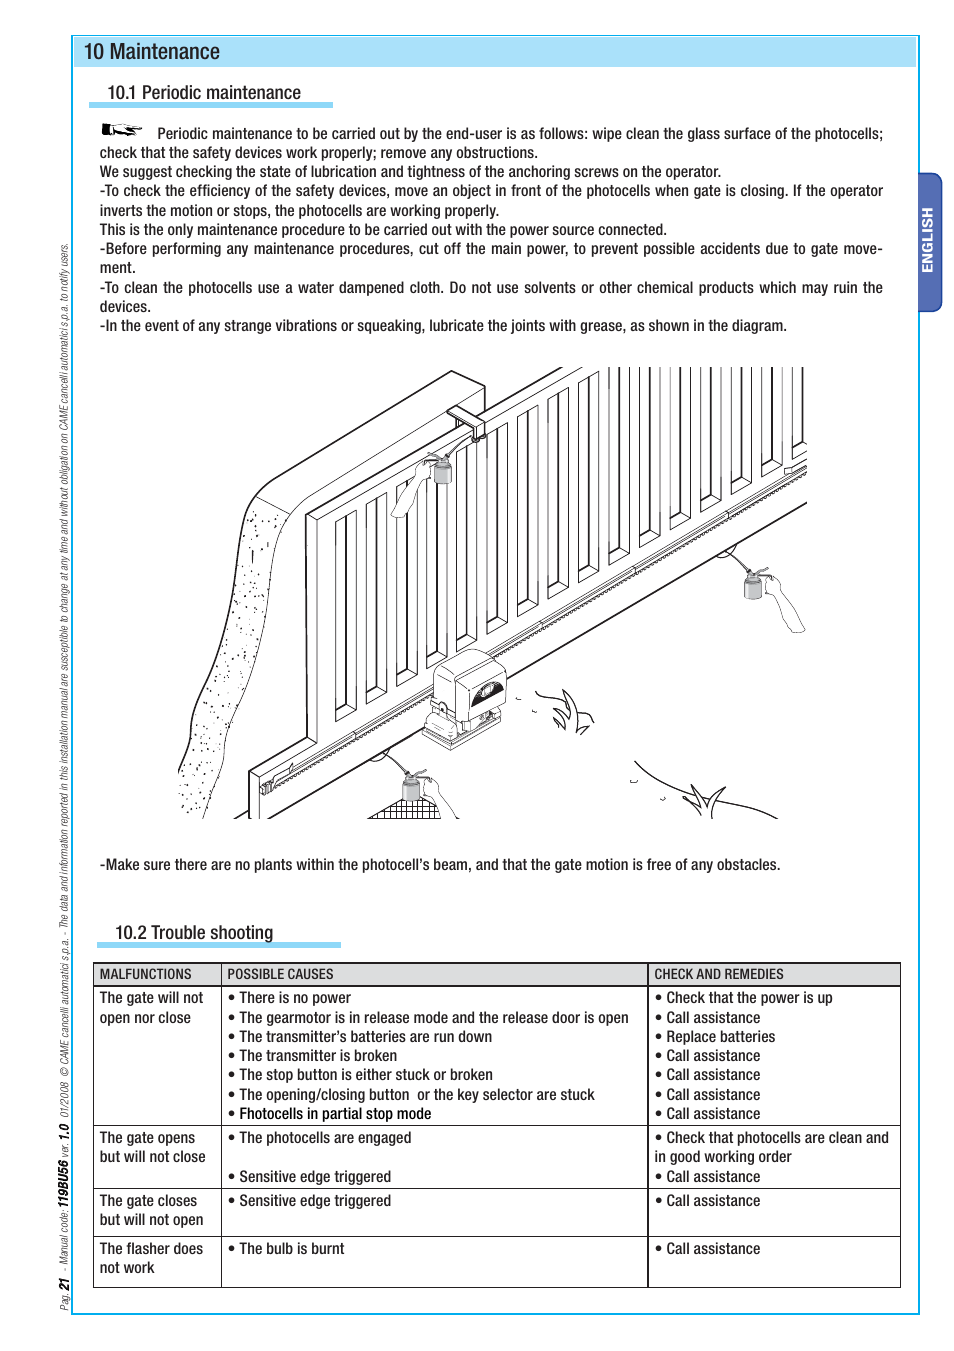 10 maintenance, 1 periodic maintenance, 2 trouble shooting | CAME BX-78 Kit  User Manual | Page 21 / 24